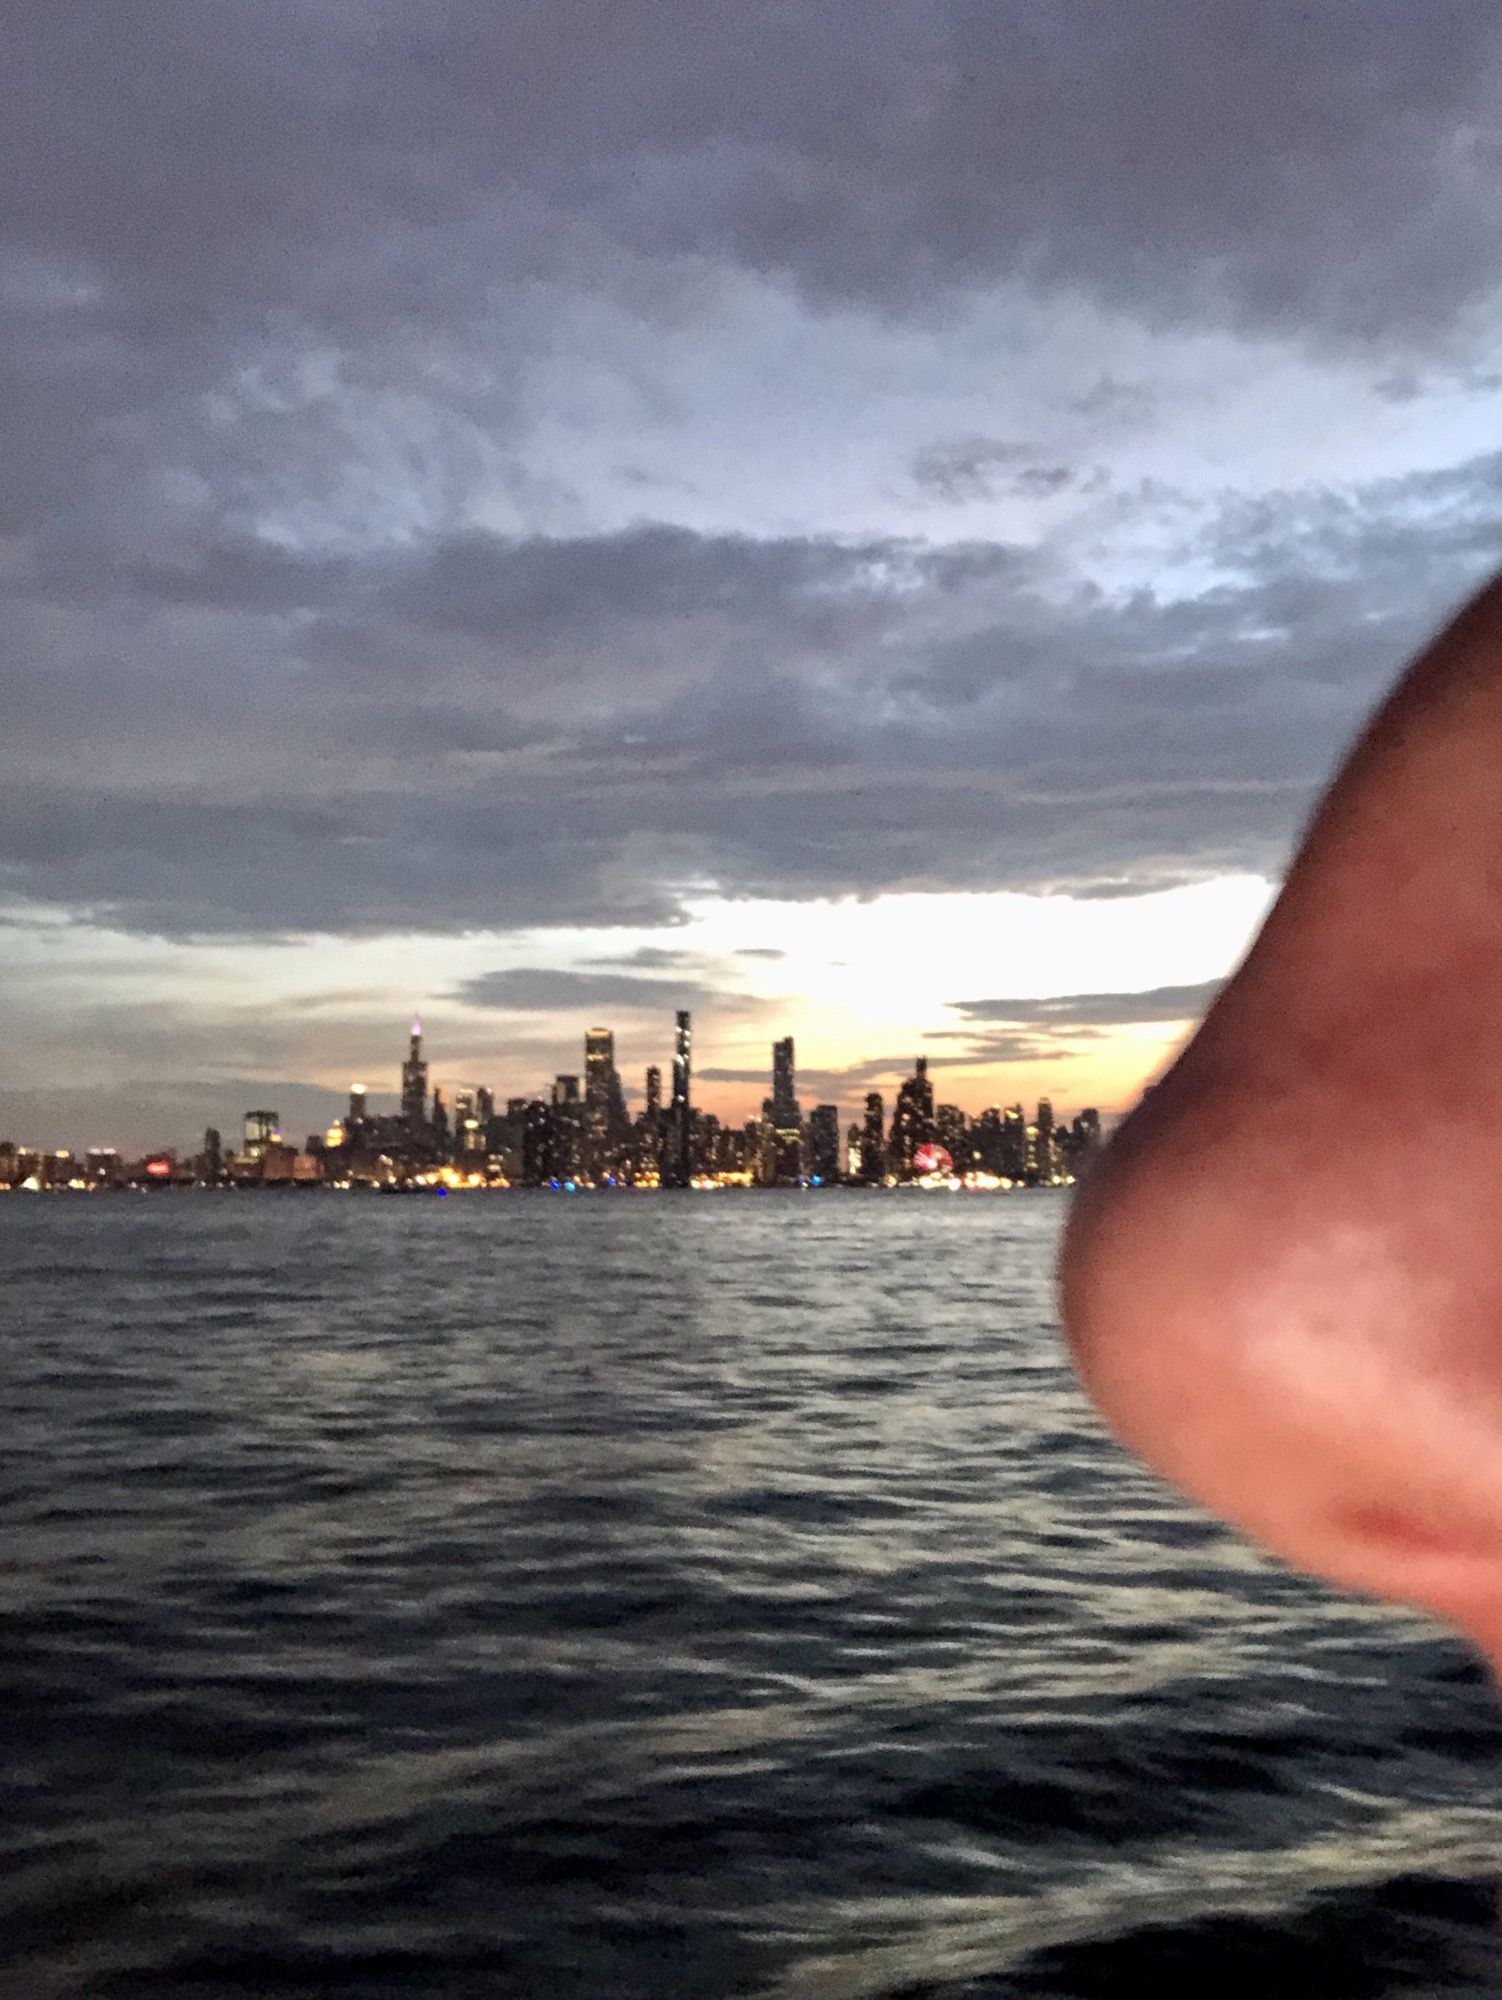 Got this great pic of the Chicago skyline at sunset while out sailing.